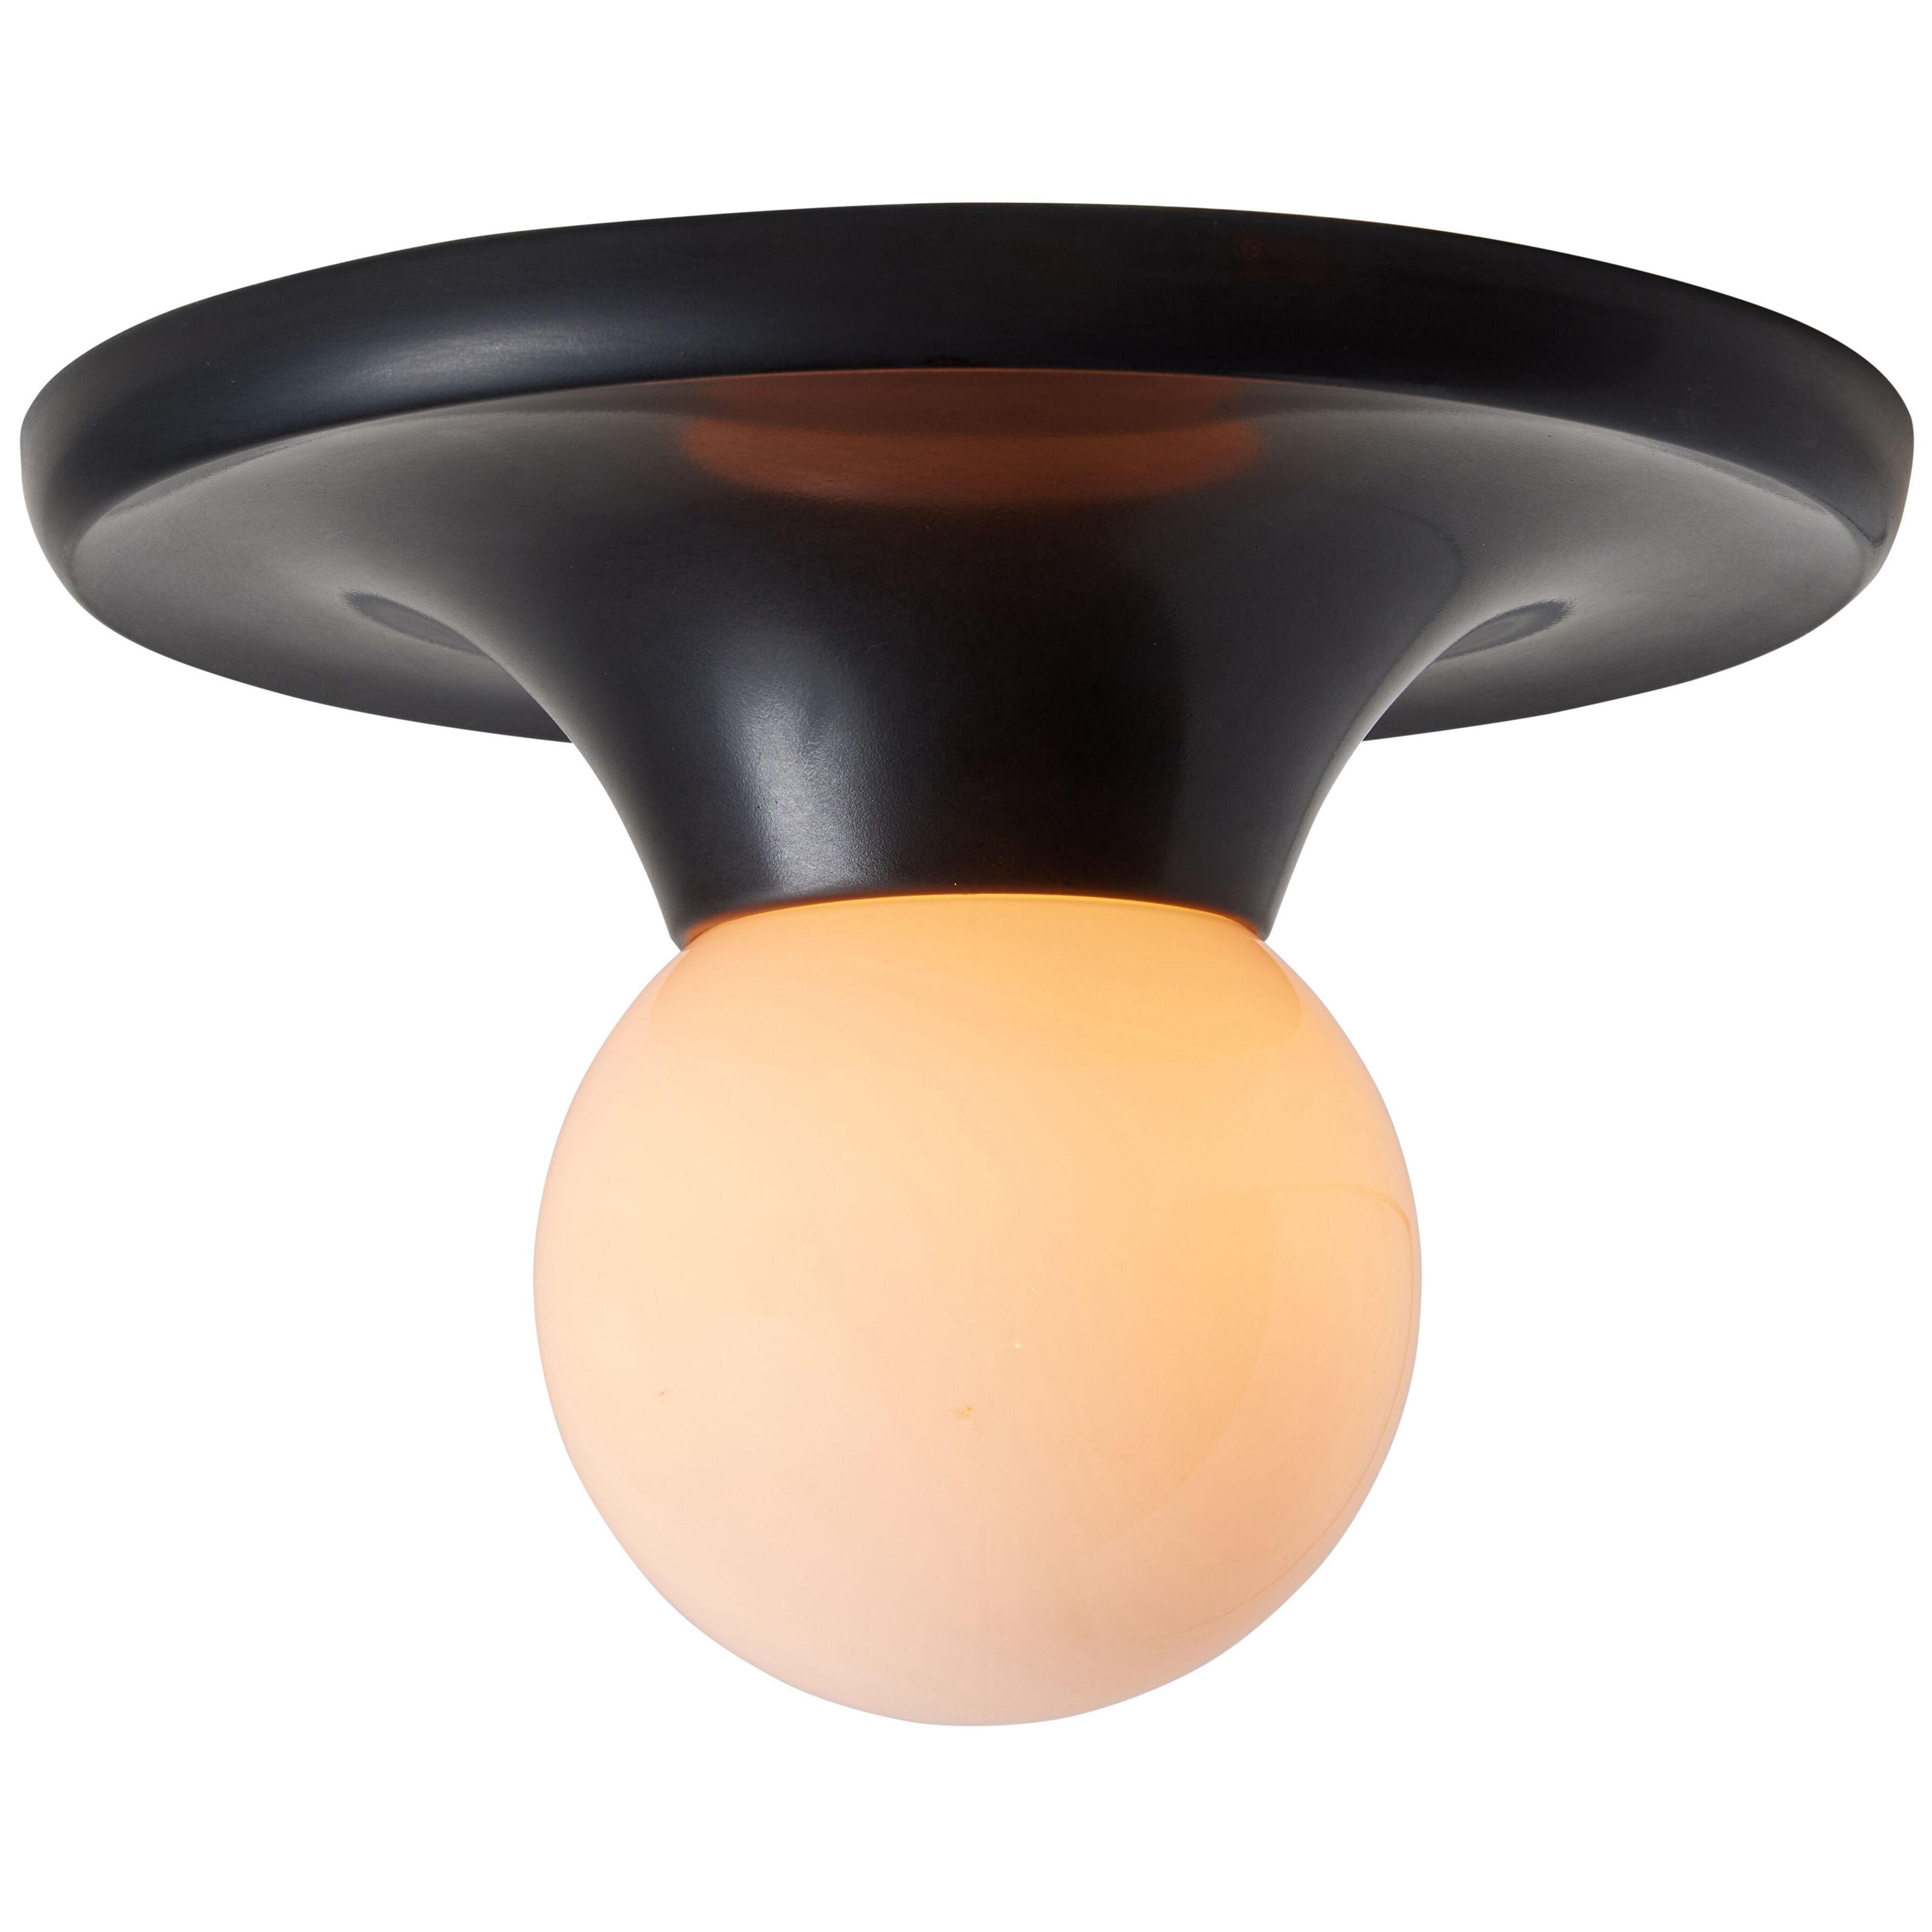 1960s Achille Castiglioni 'Light Ball' Wall or Ceiling Lamp in Black for Flos